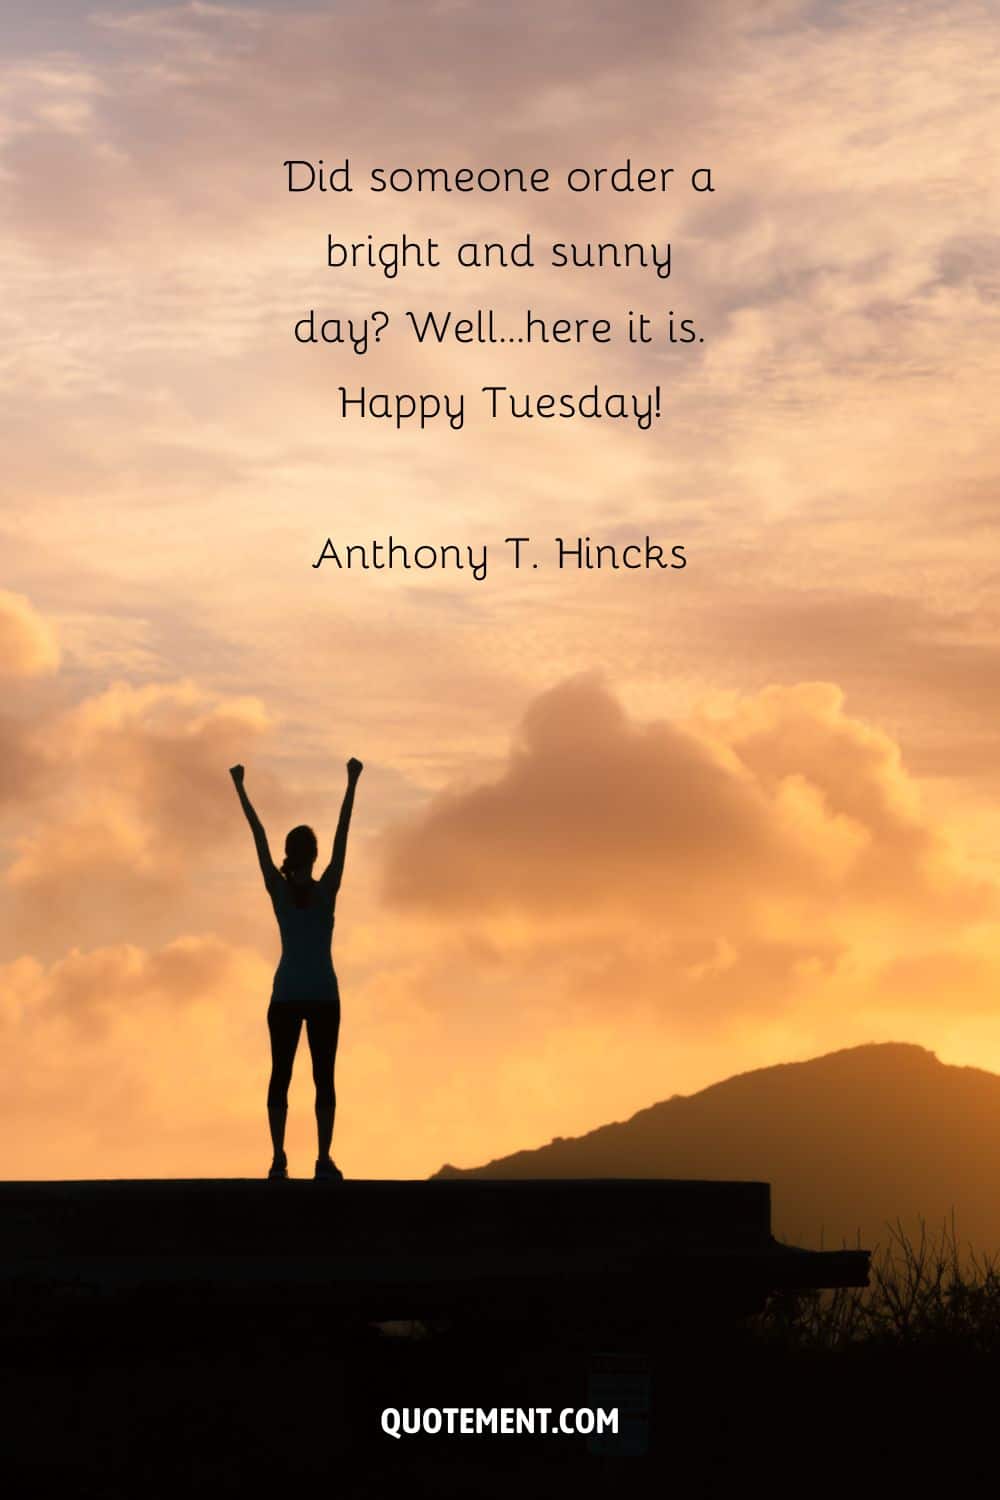 “Did someone order a bright and sunny day Well…here it is. Happy Tuesday!” — Anthony T. Hincks